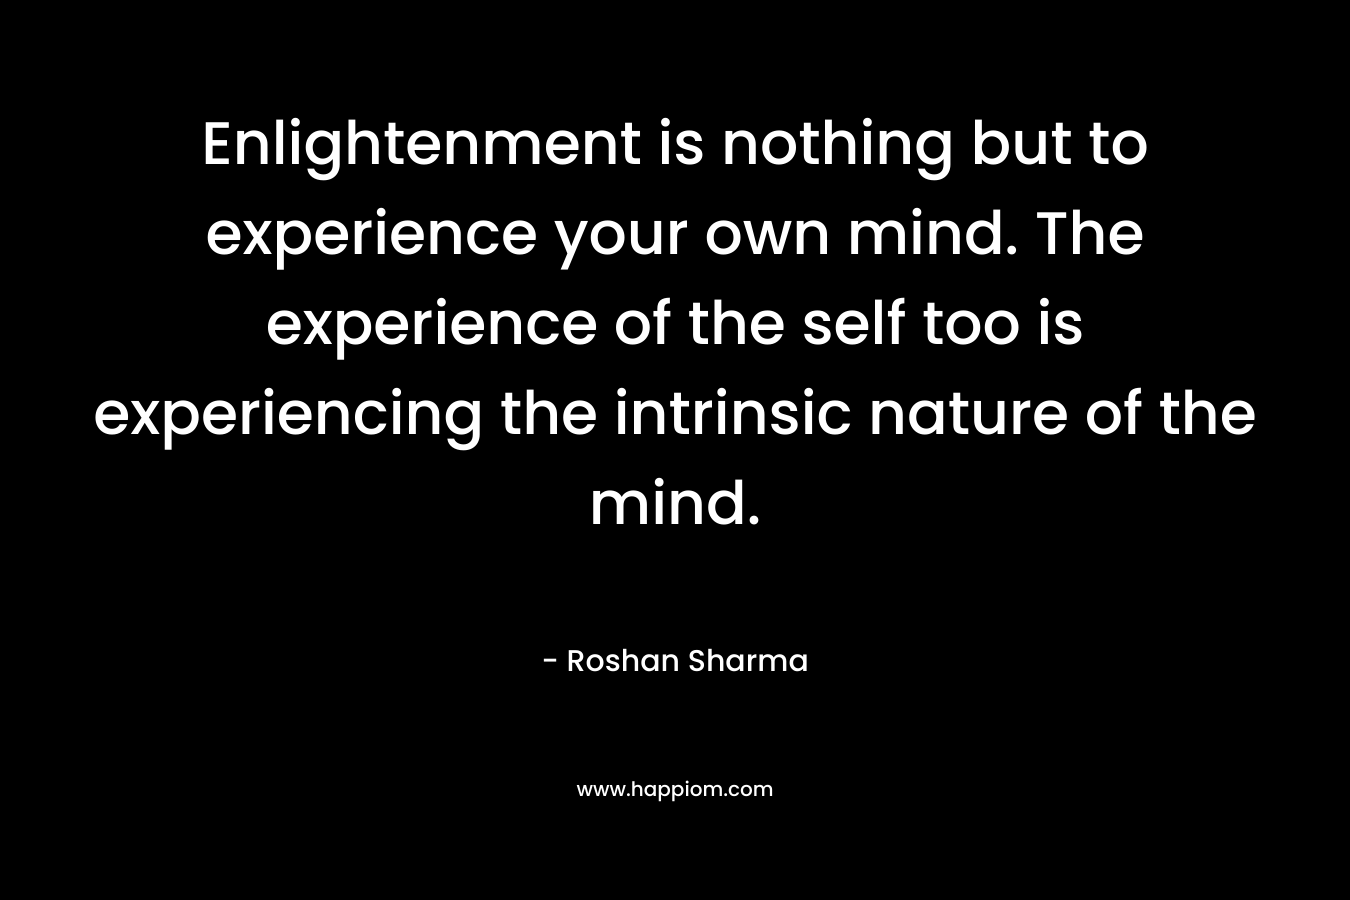 Enlightenment is nothing but to experience your own mind. The experience of the self too is experiencing the intrinsic nature of the mind. – Roshan Sharma